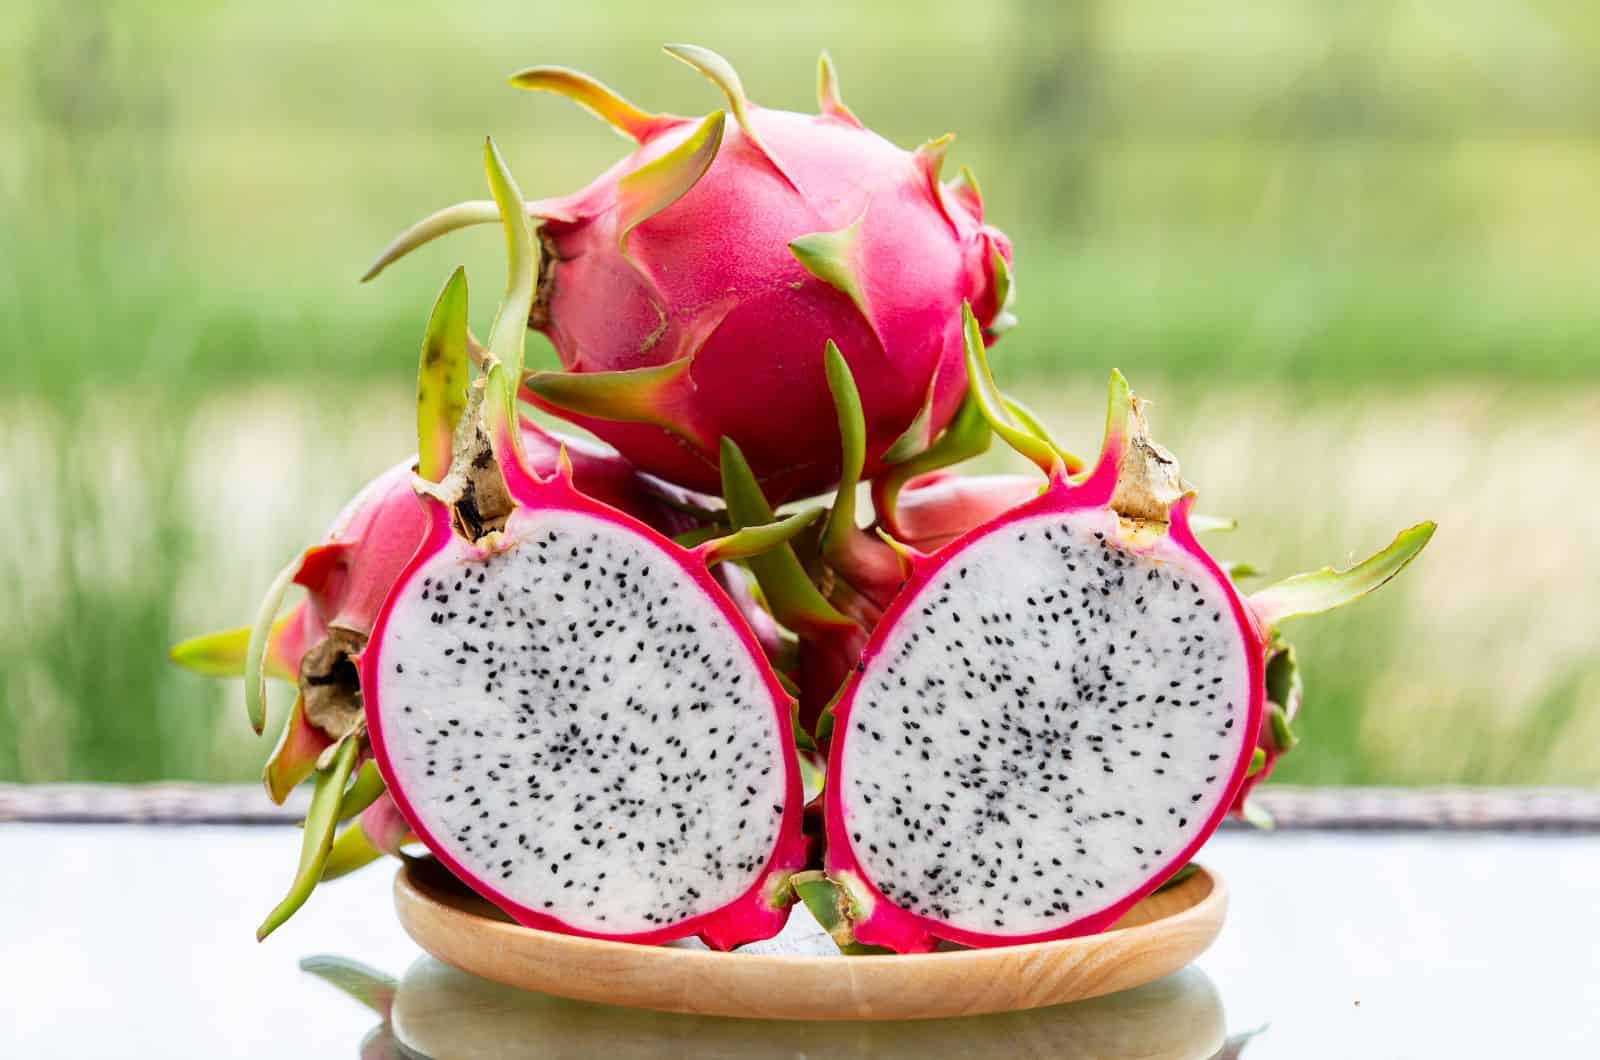 Dragon Fruit in plate on table